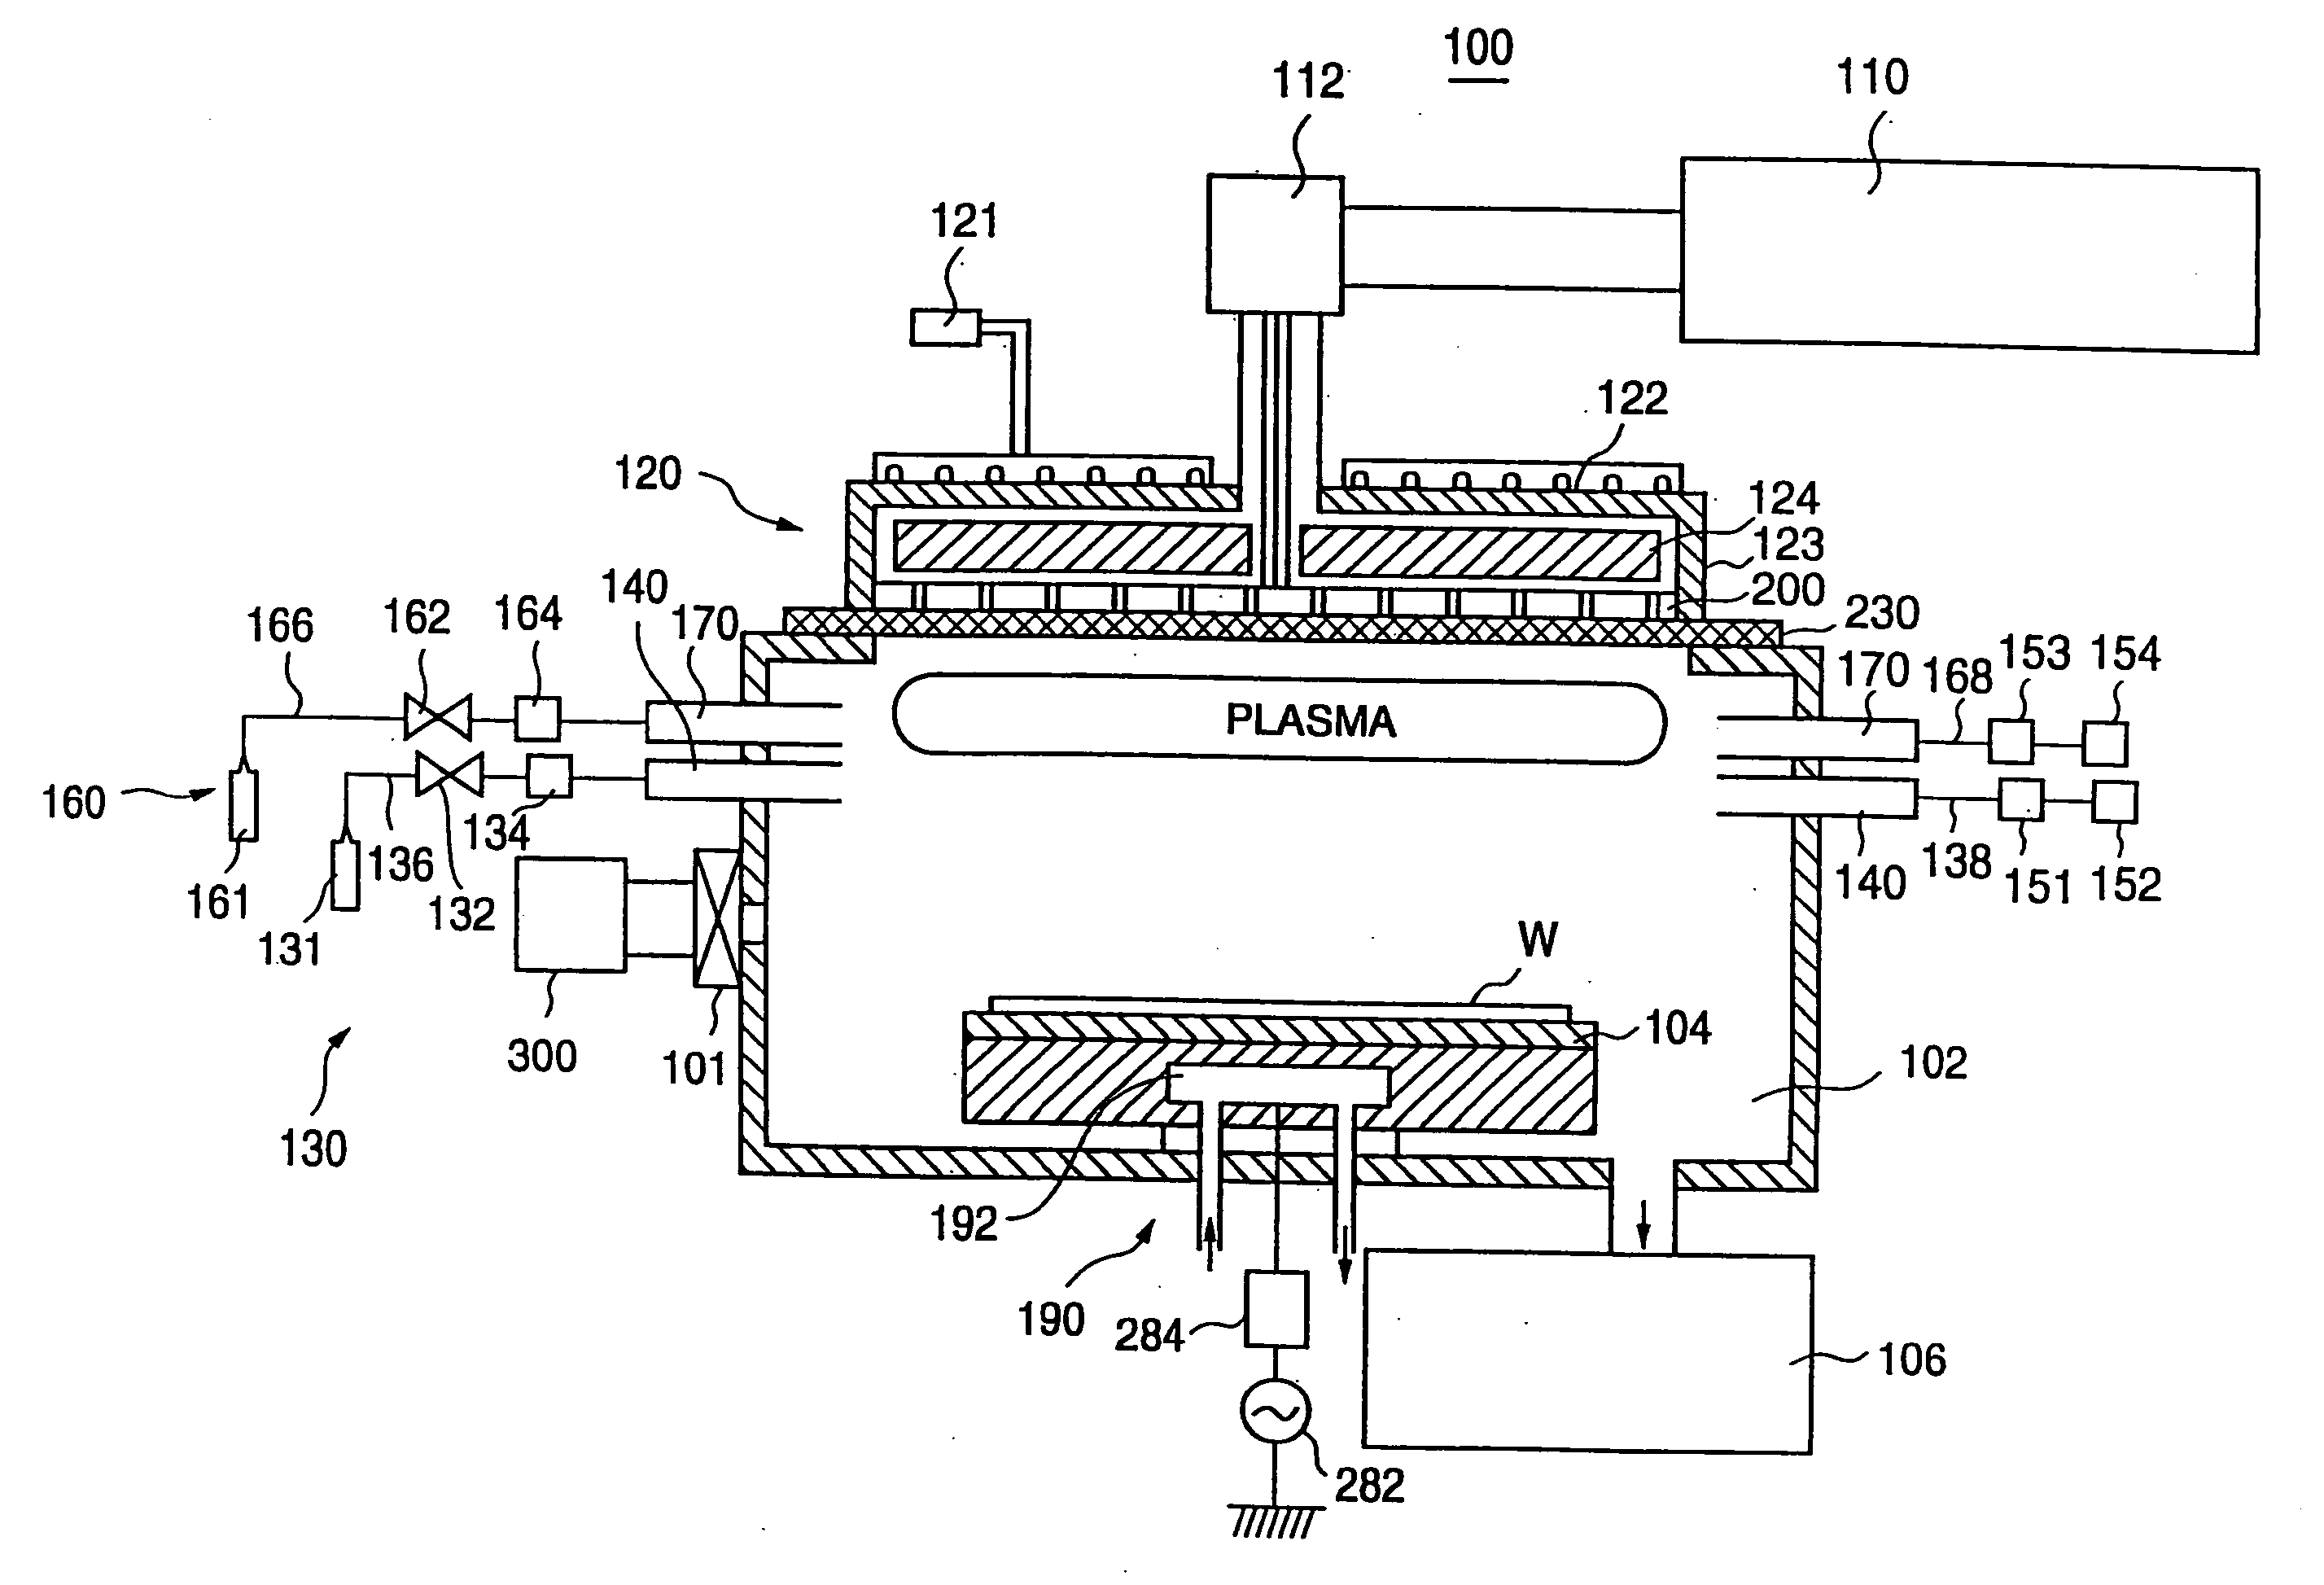 Plasma processing apparatus having an evacuating arrangement to evacuate gas from a gas-introducing part of a process chamber